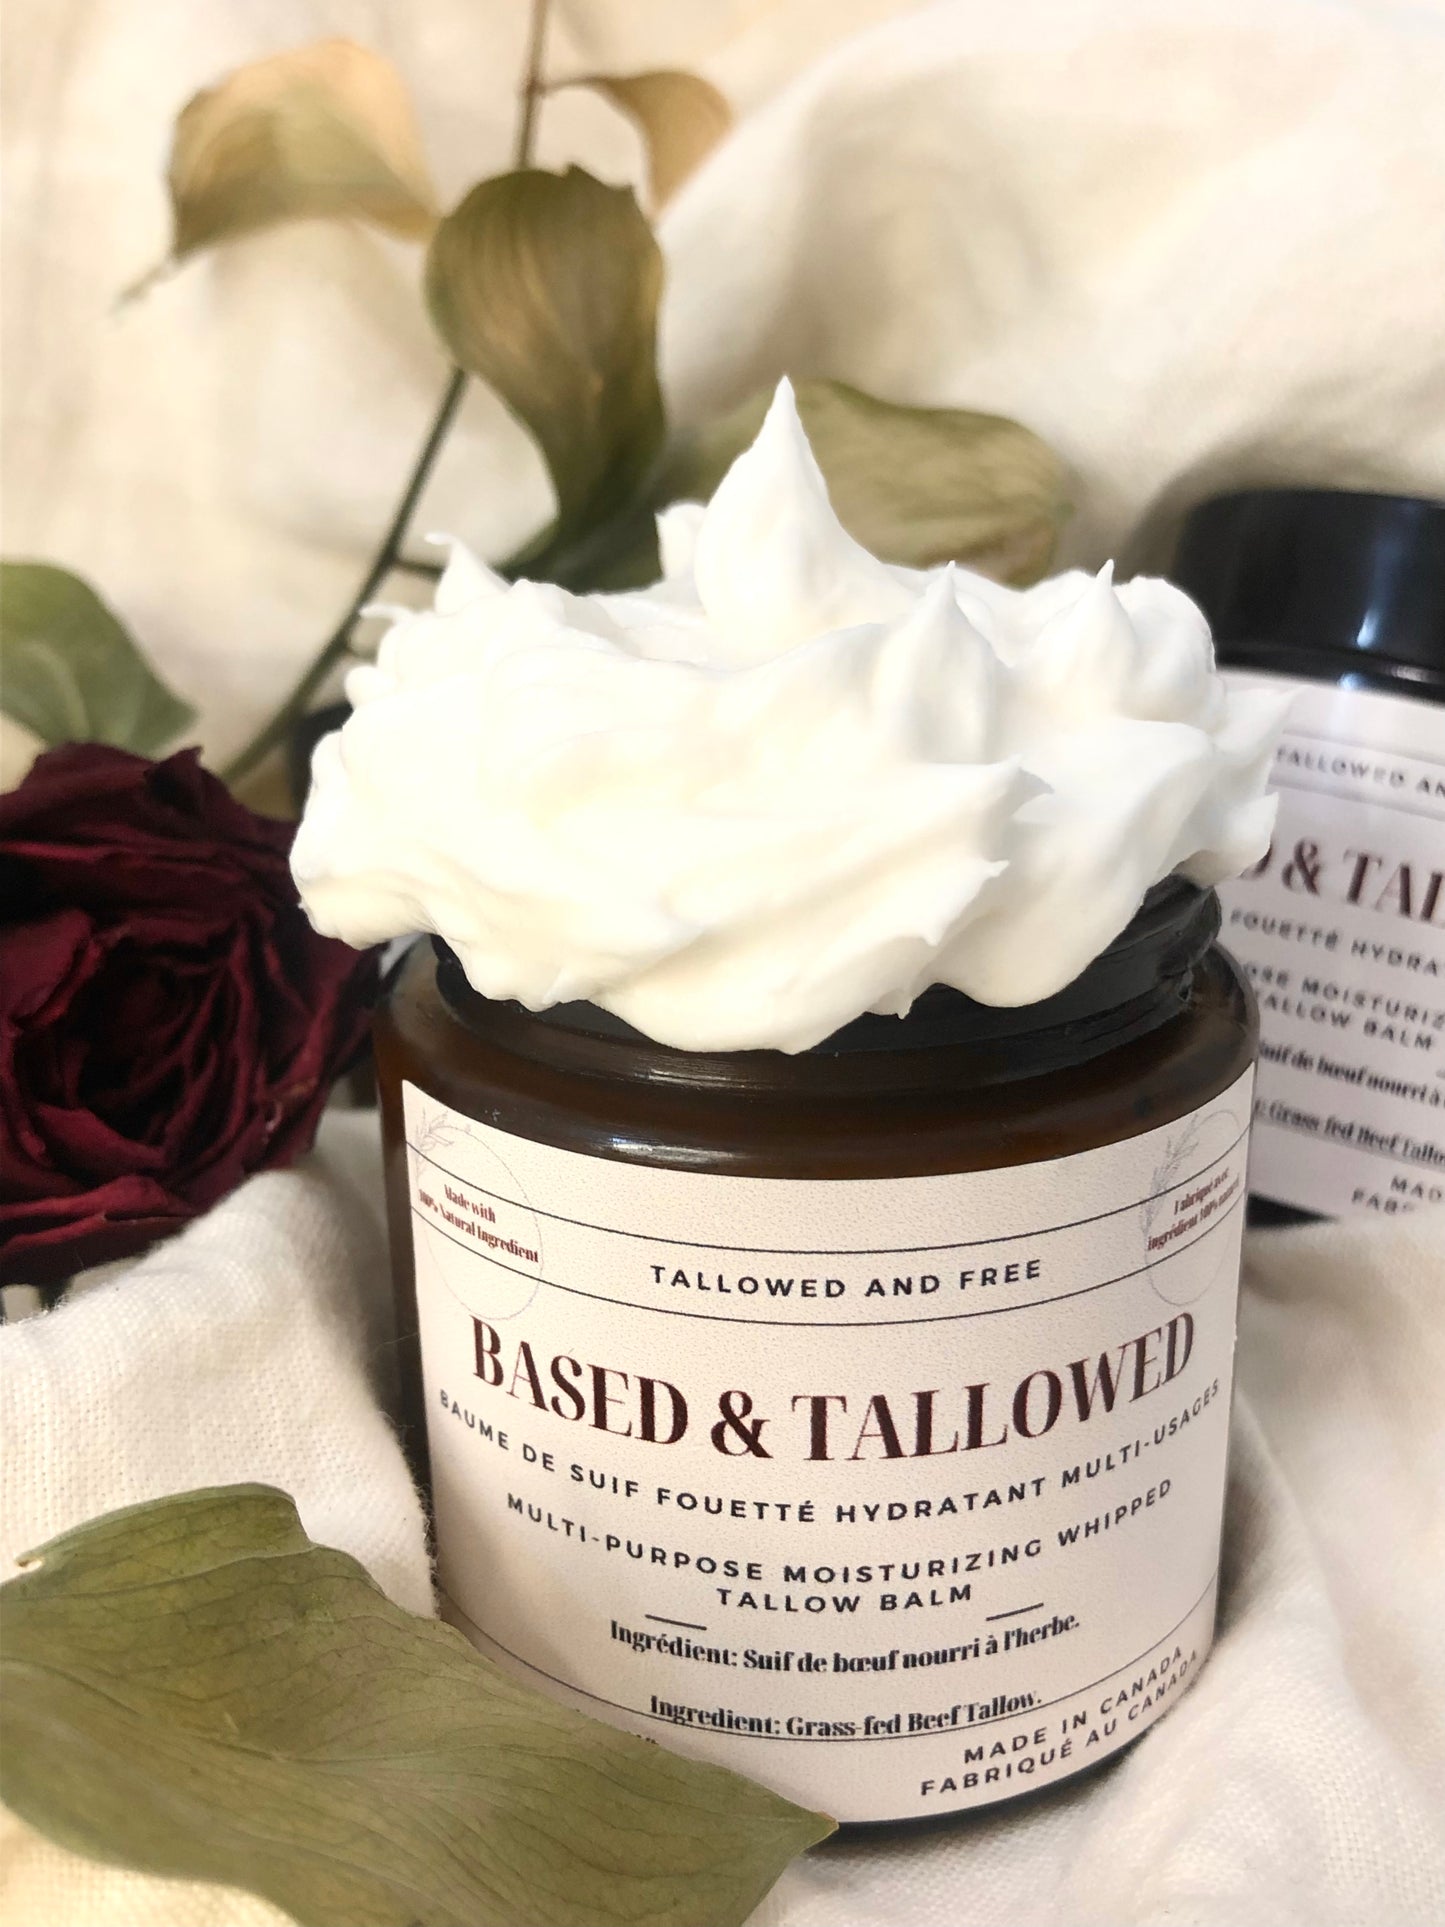 Based & Tallowed: Unscented Tallow Balm (Whipped and Regular Options ) - 100 & 60 ml - Limited Stock!